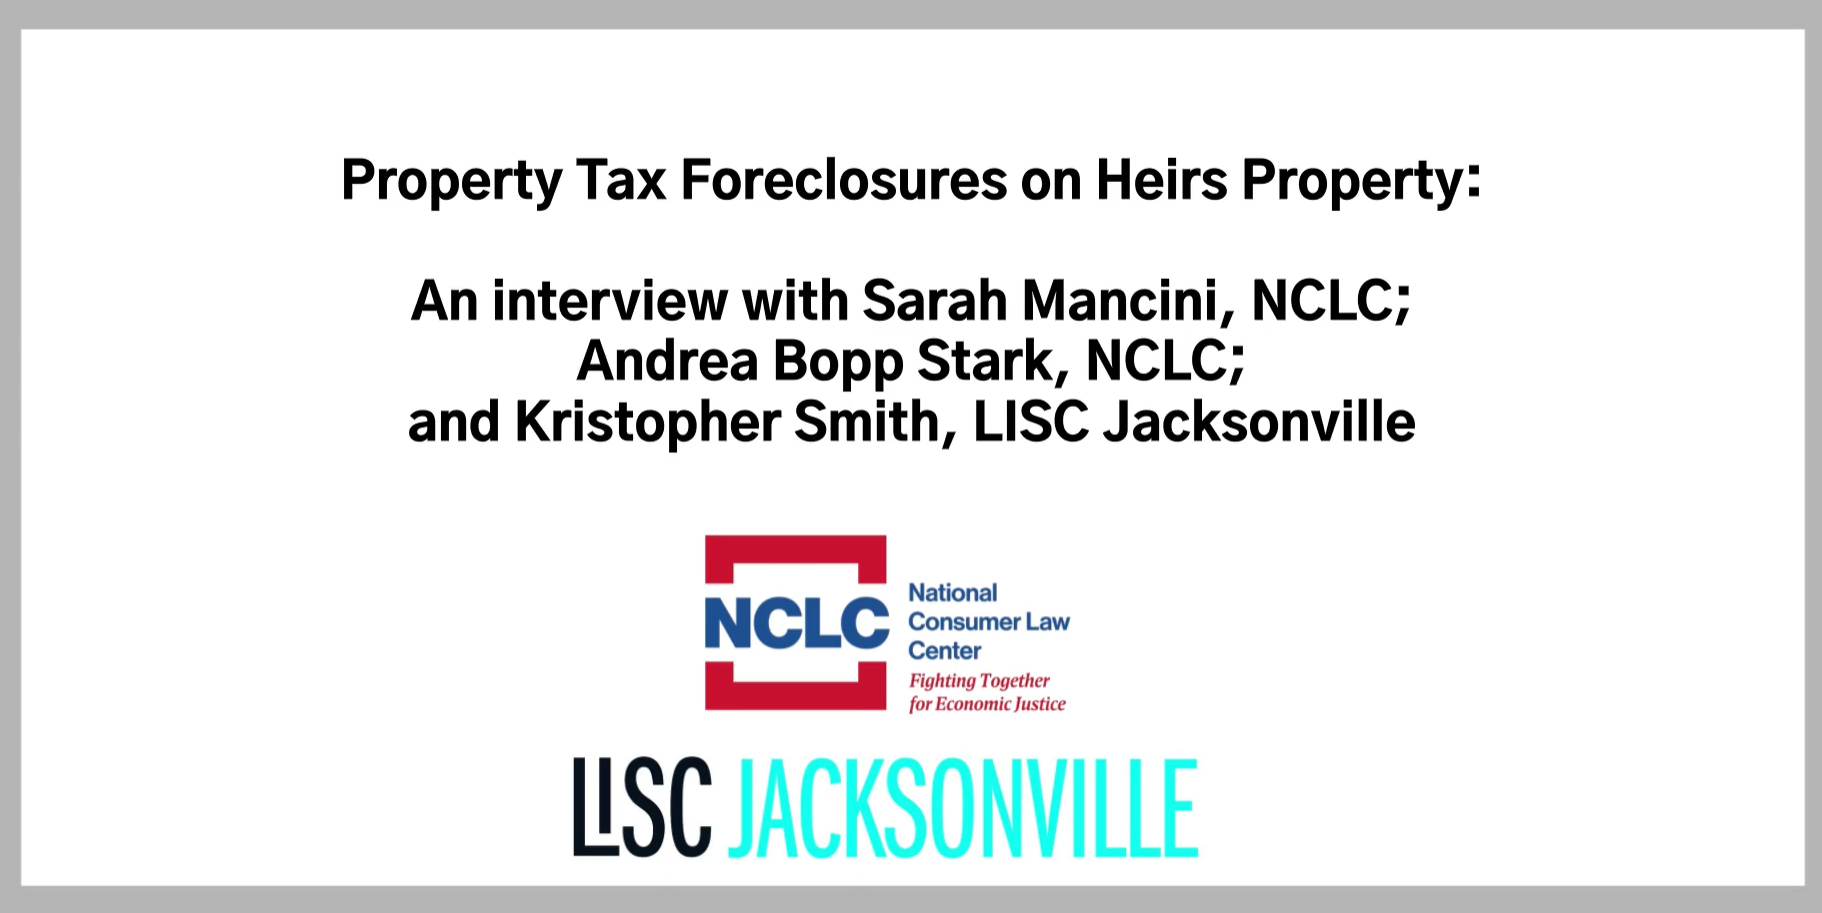 Thumbnail of Property Tax Foreclosures on Heirs Property webinar 2023